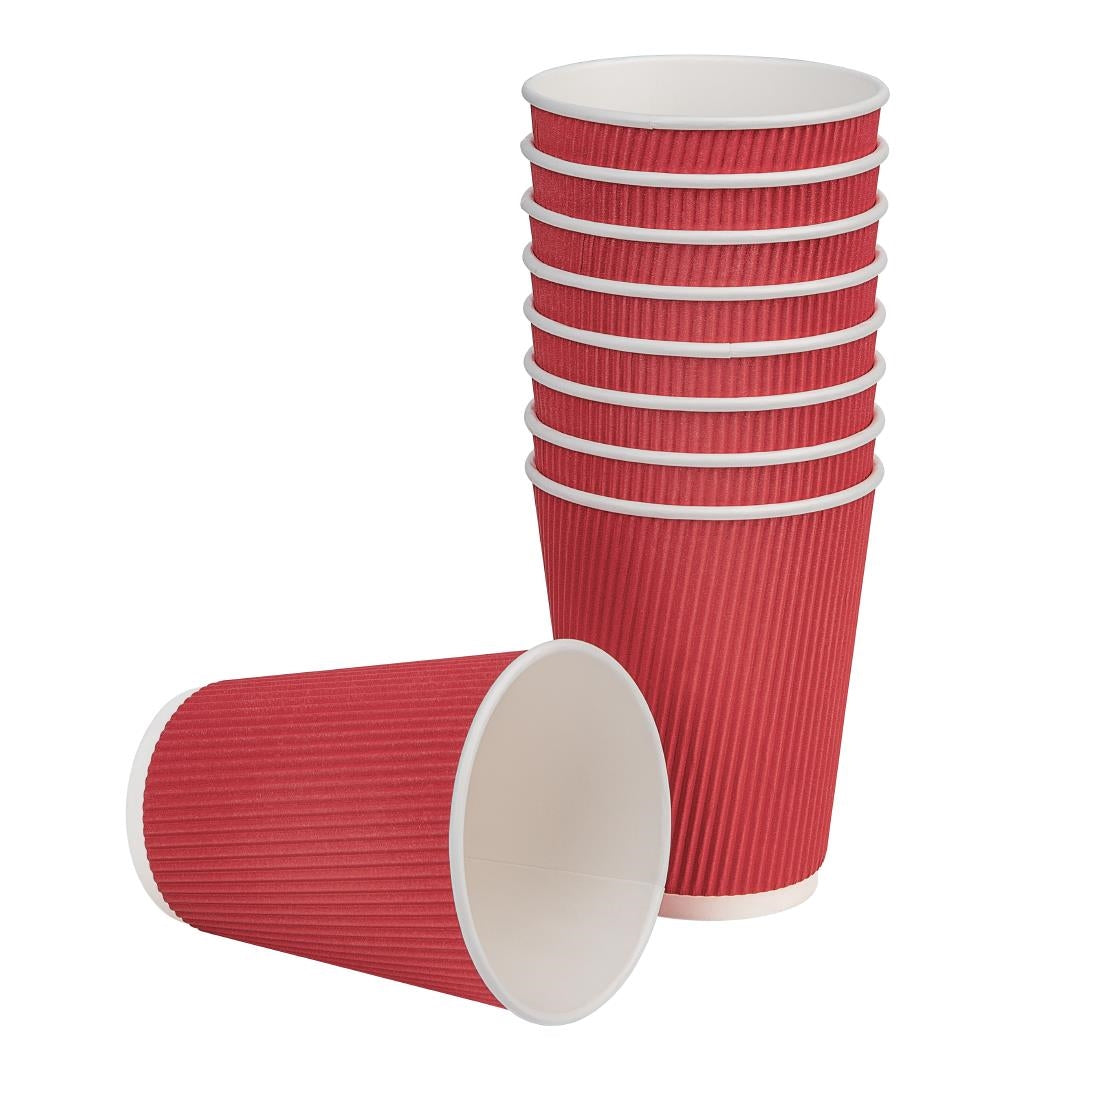 Fiesta Ripple Wall Takeaway Coffee Cups Red 340ml / 12oz (Pack of 500) JD Catering Equipment Solutions Ltd